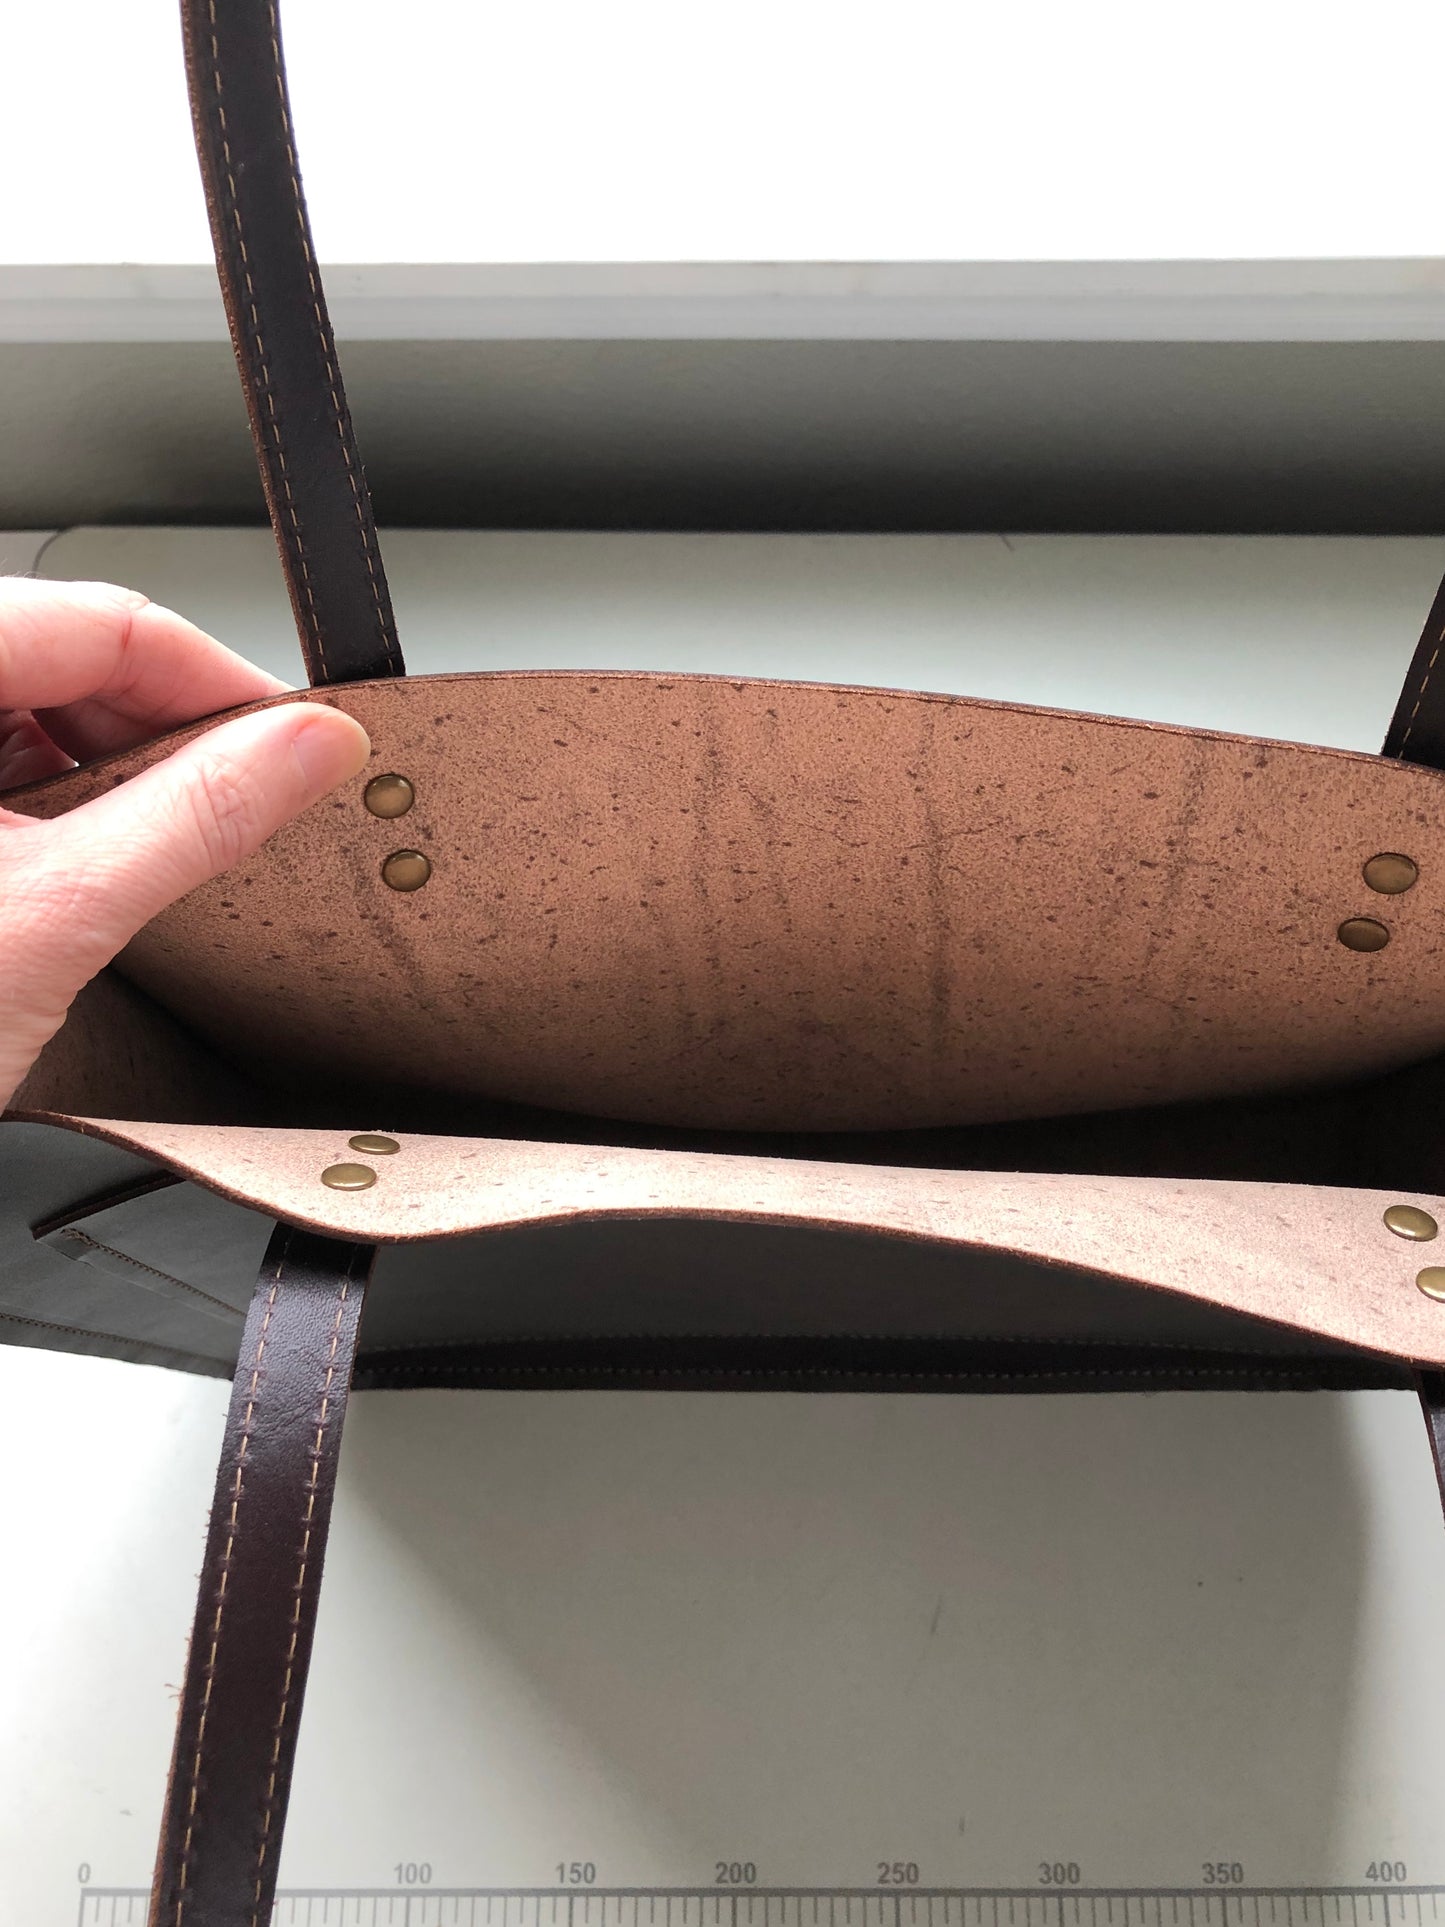 Natural leather interior of large tote bag.